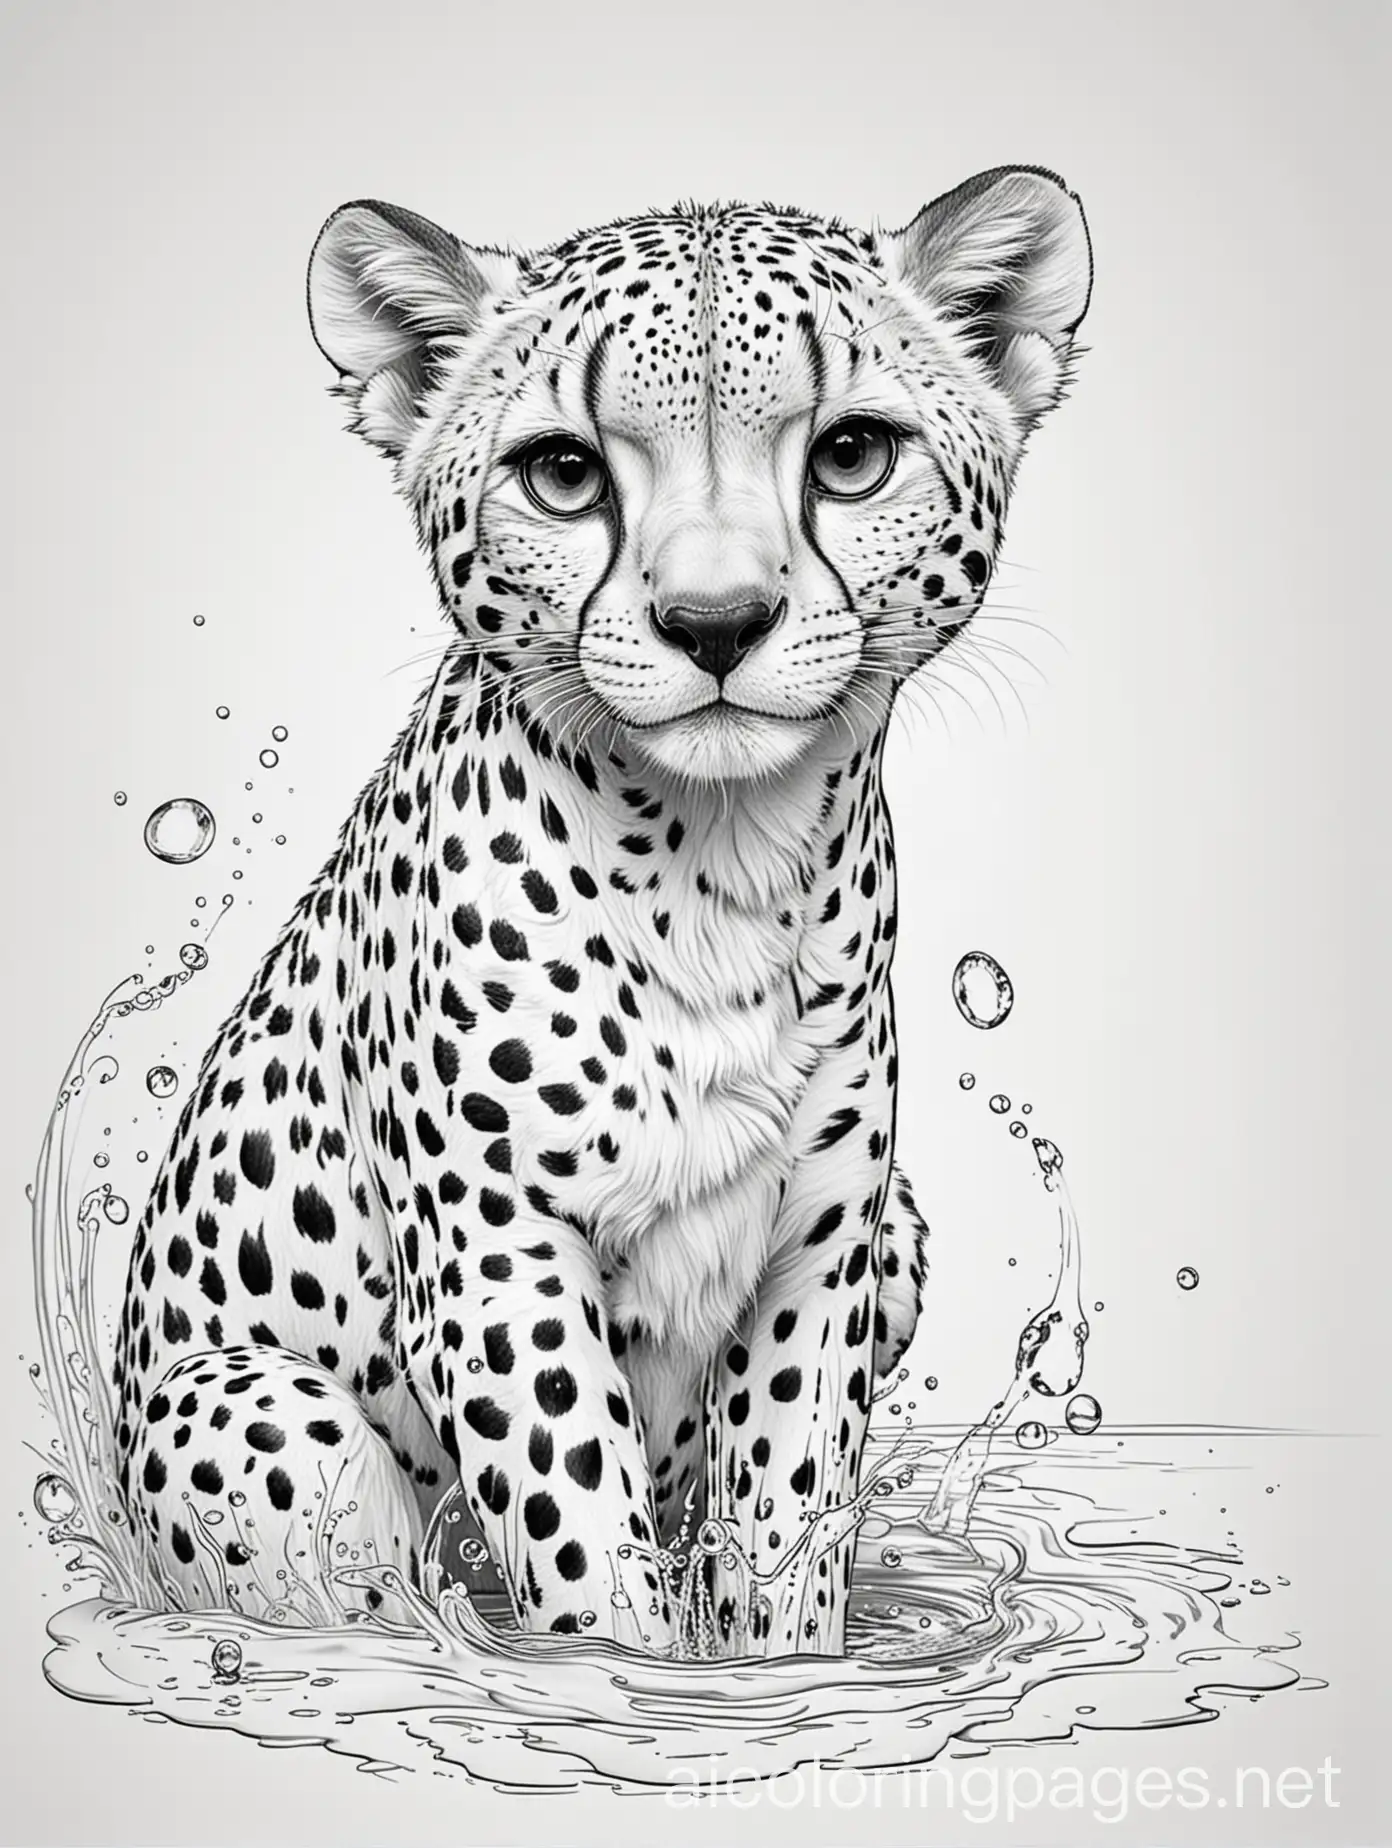 Cheerful-Cheetah-Drinking-Water-Monochrome-Coloring-Page-for-Kids